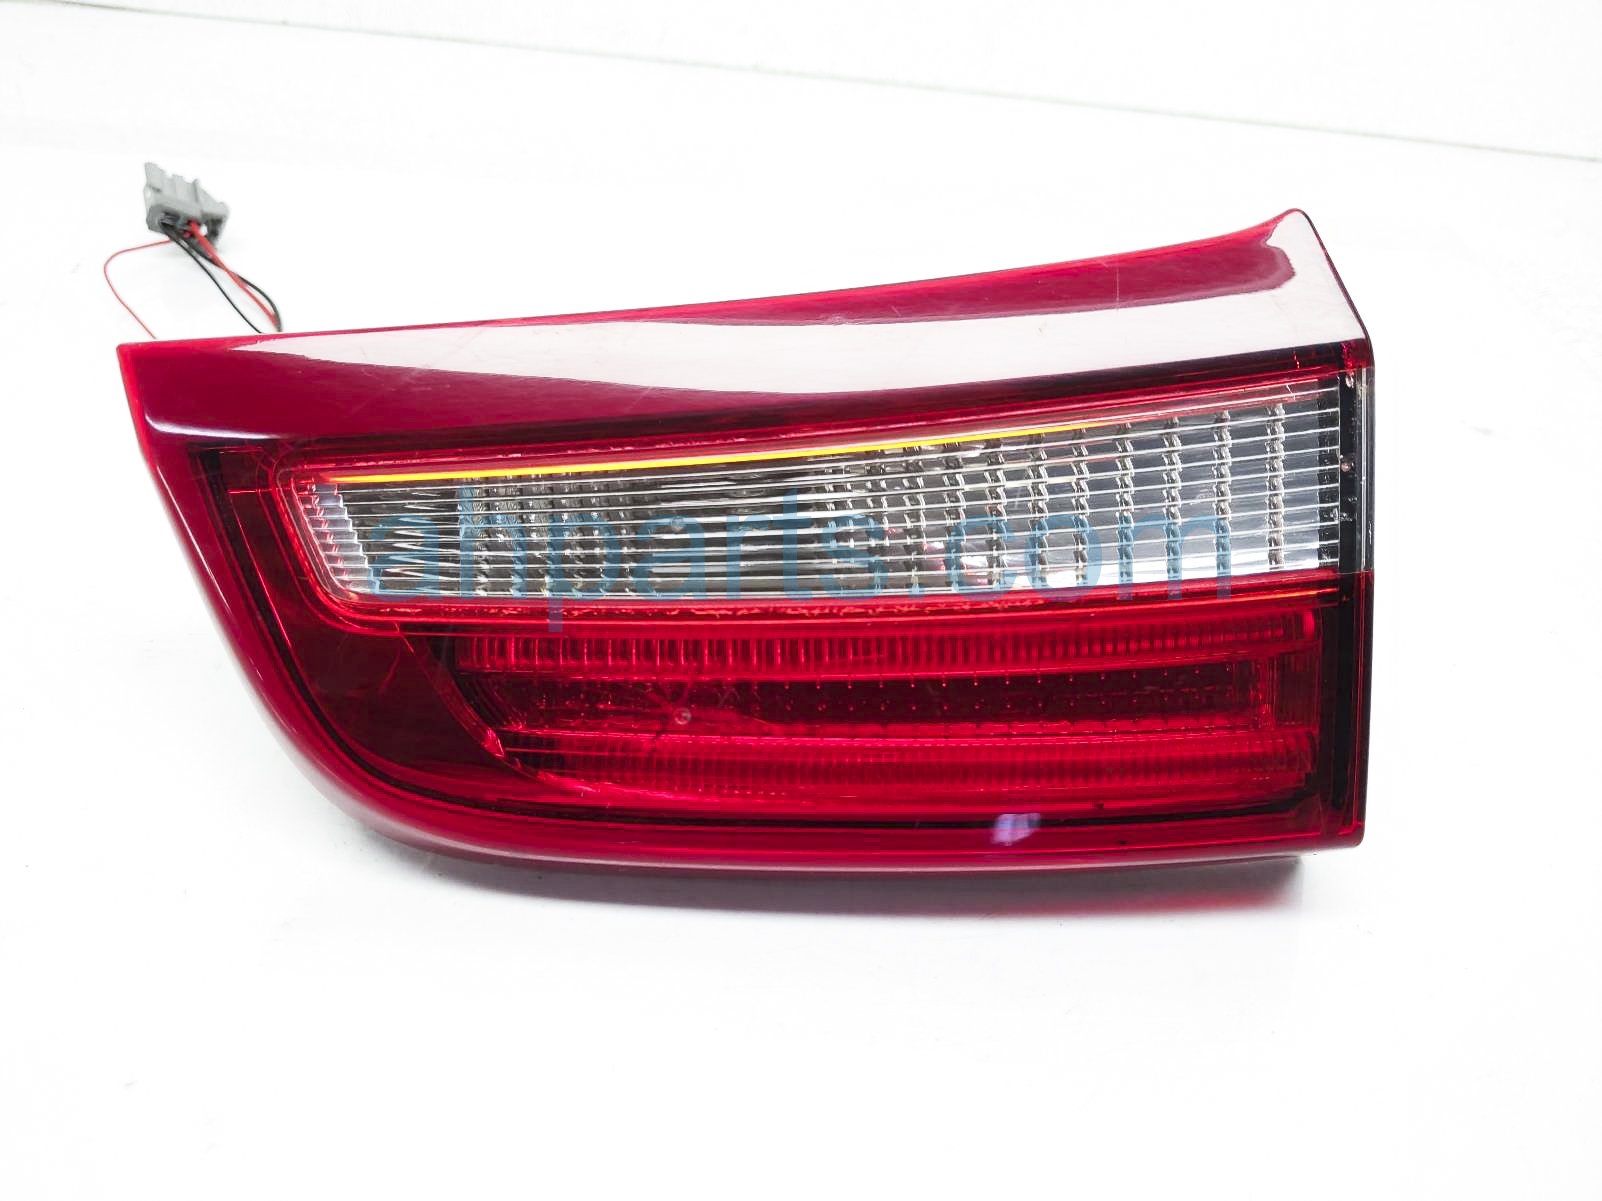 $30 Volvo LH BACK UP LAMP (ON TRUNK) - NOTES